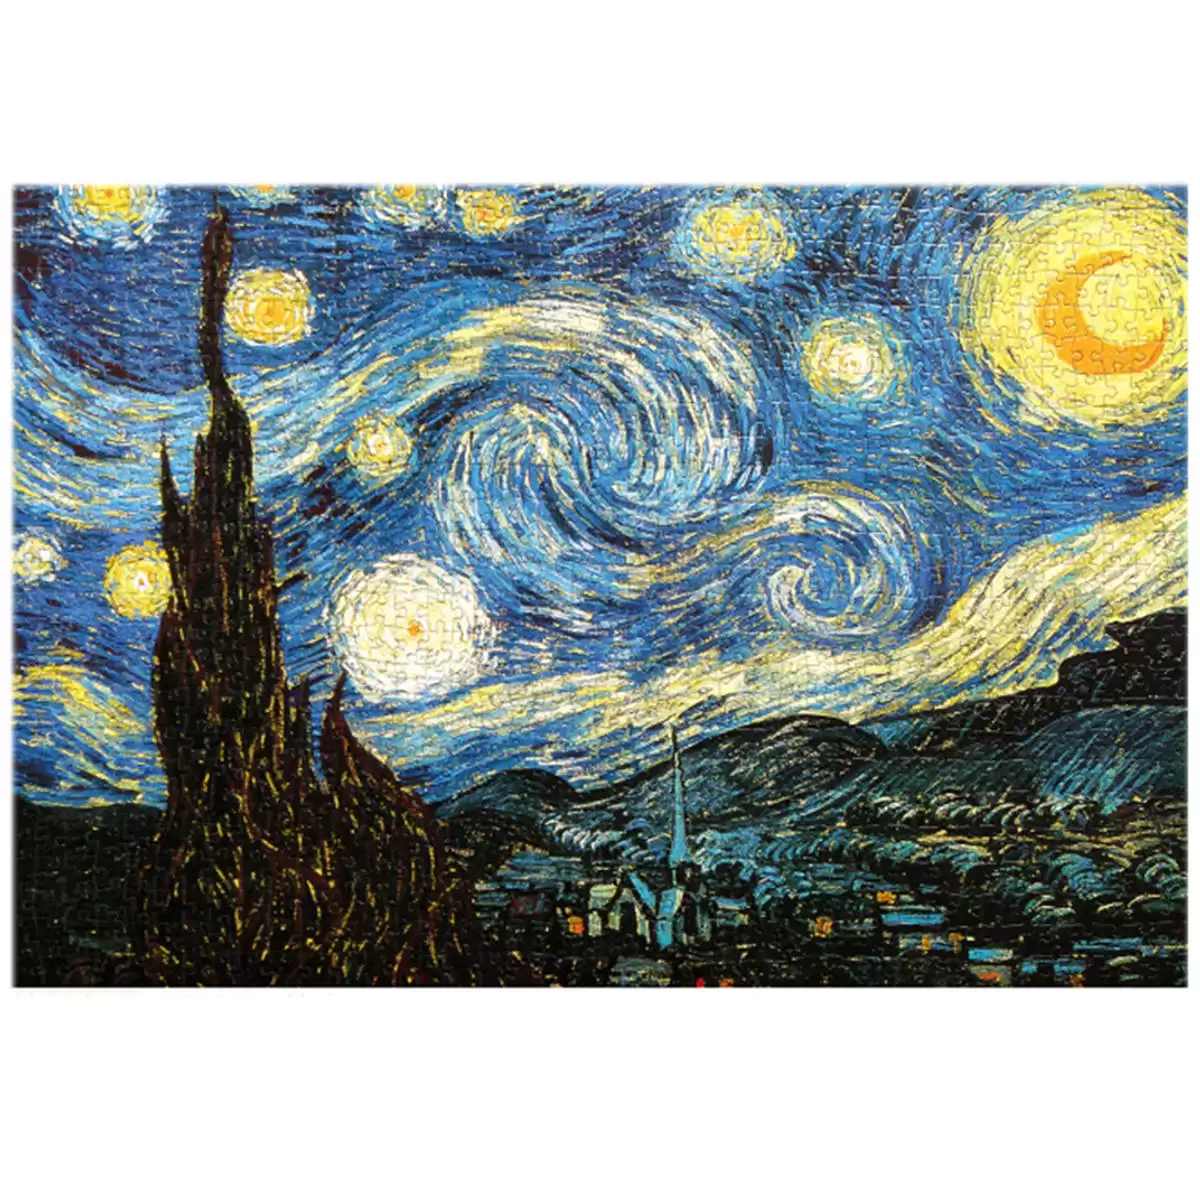 Order In Just $9.99 1000 Pieces Jigsaw Puzzles Landscape Jigsaw Puzzle Toy For Adults Children Kids Educational Games Toys With This Coupon At Banggood